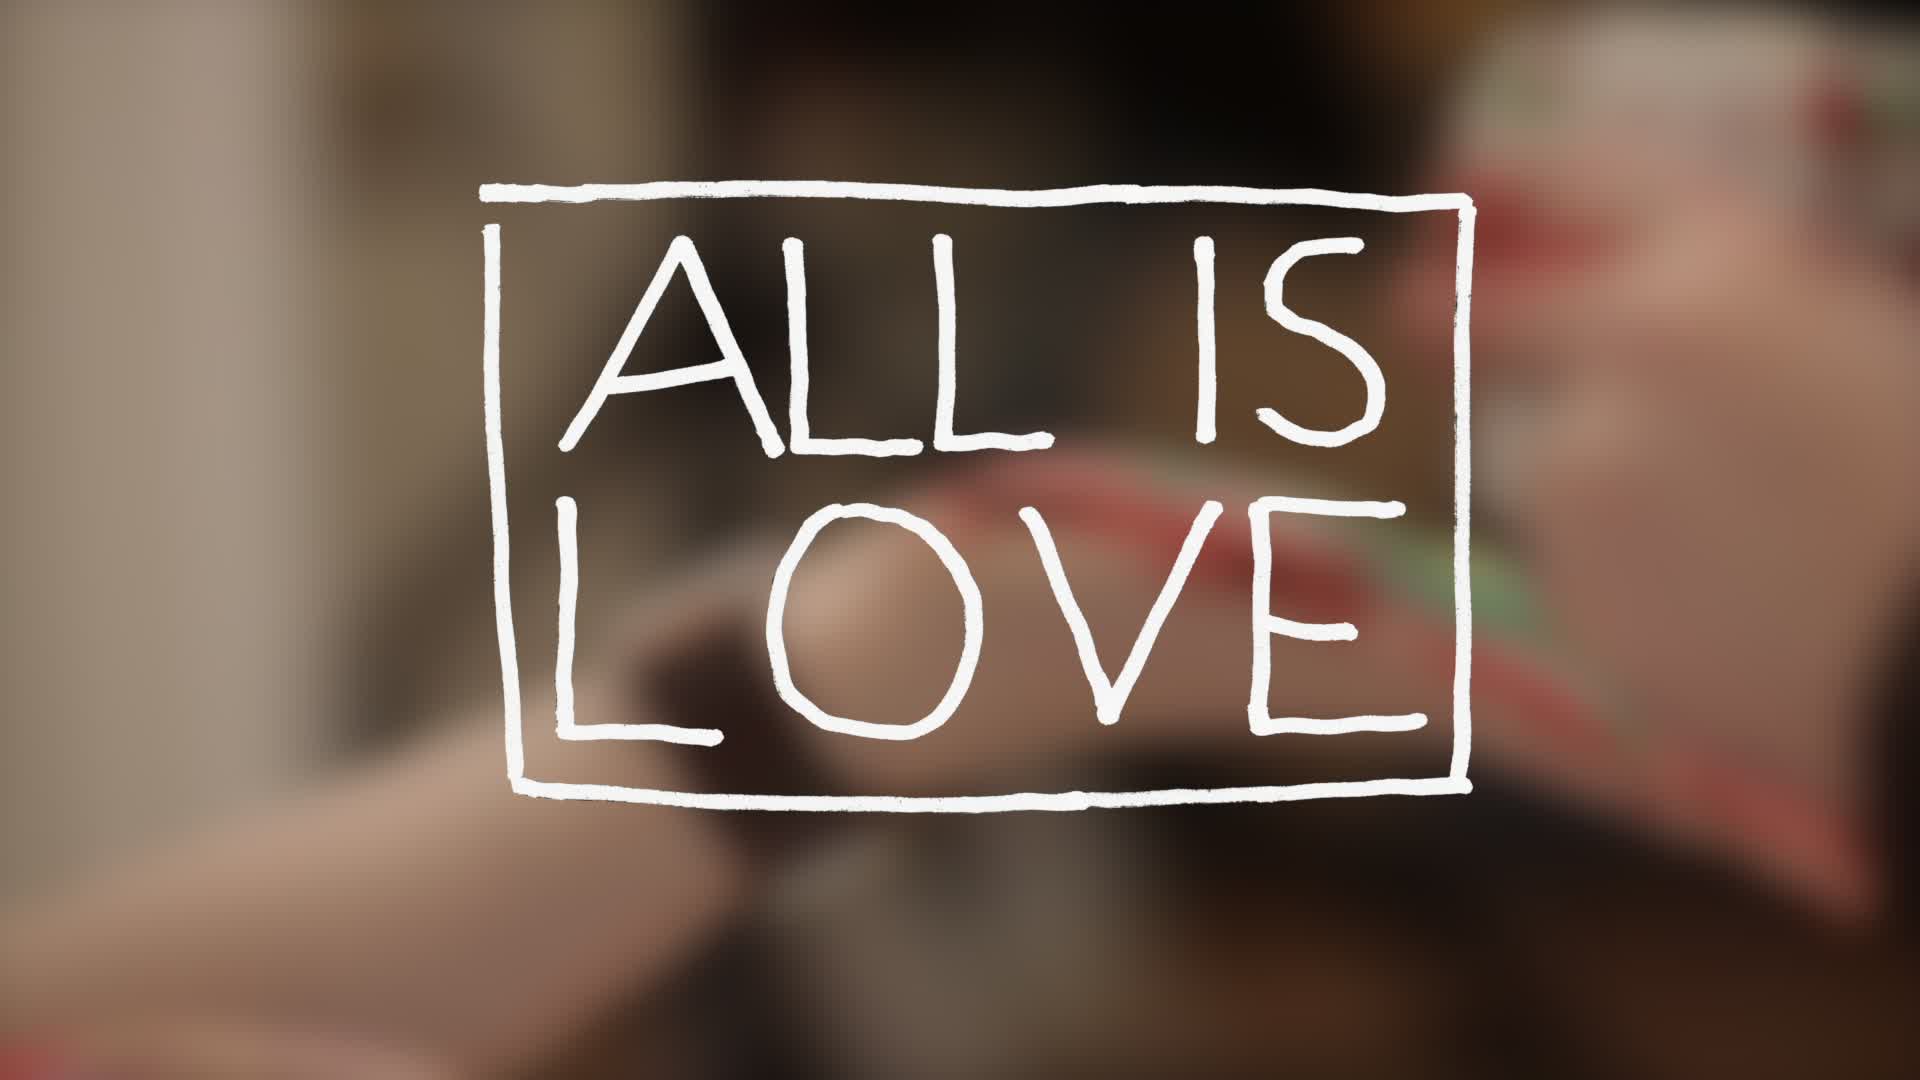 All Is Love (2013)